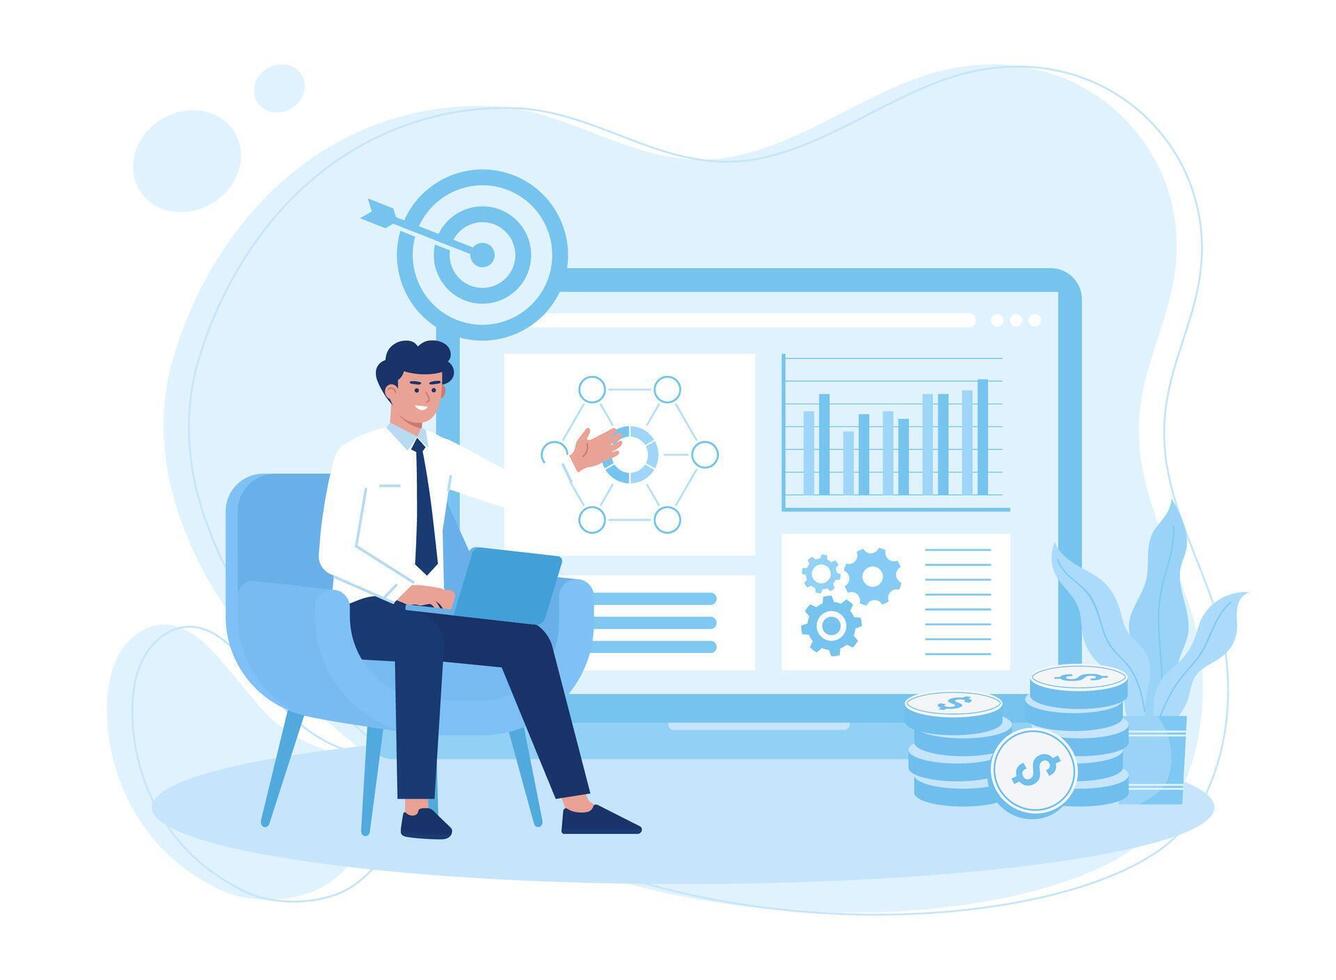 target working on growth data analysis using a laptop concept flat illustration vector